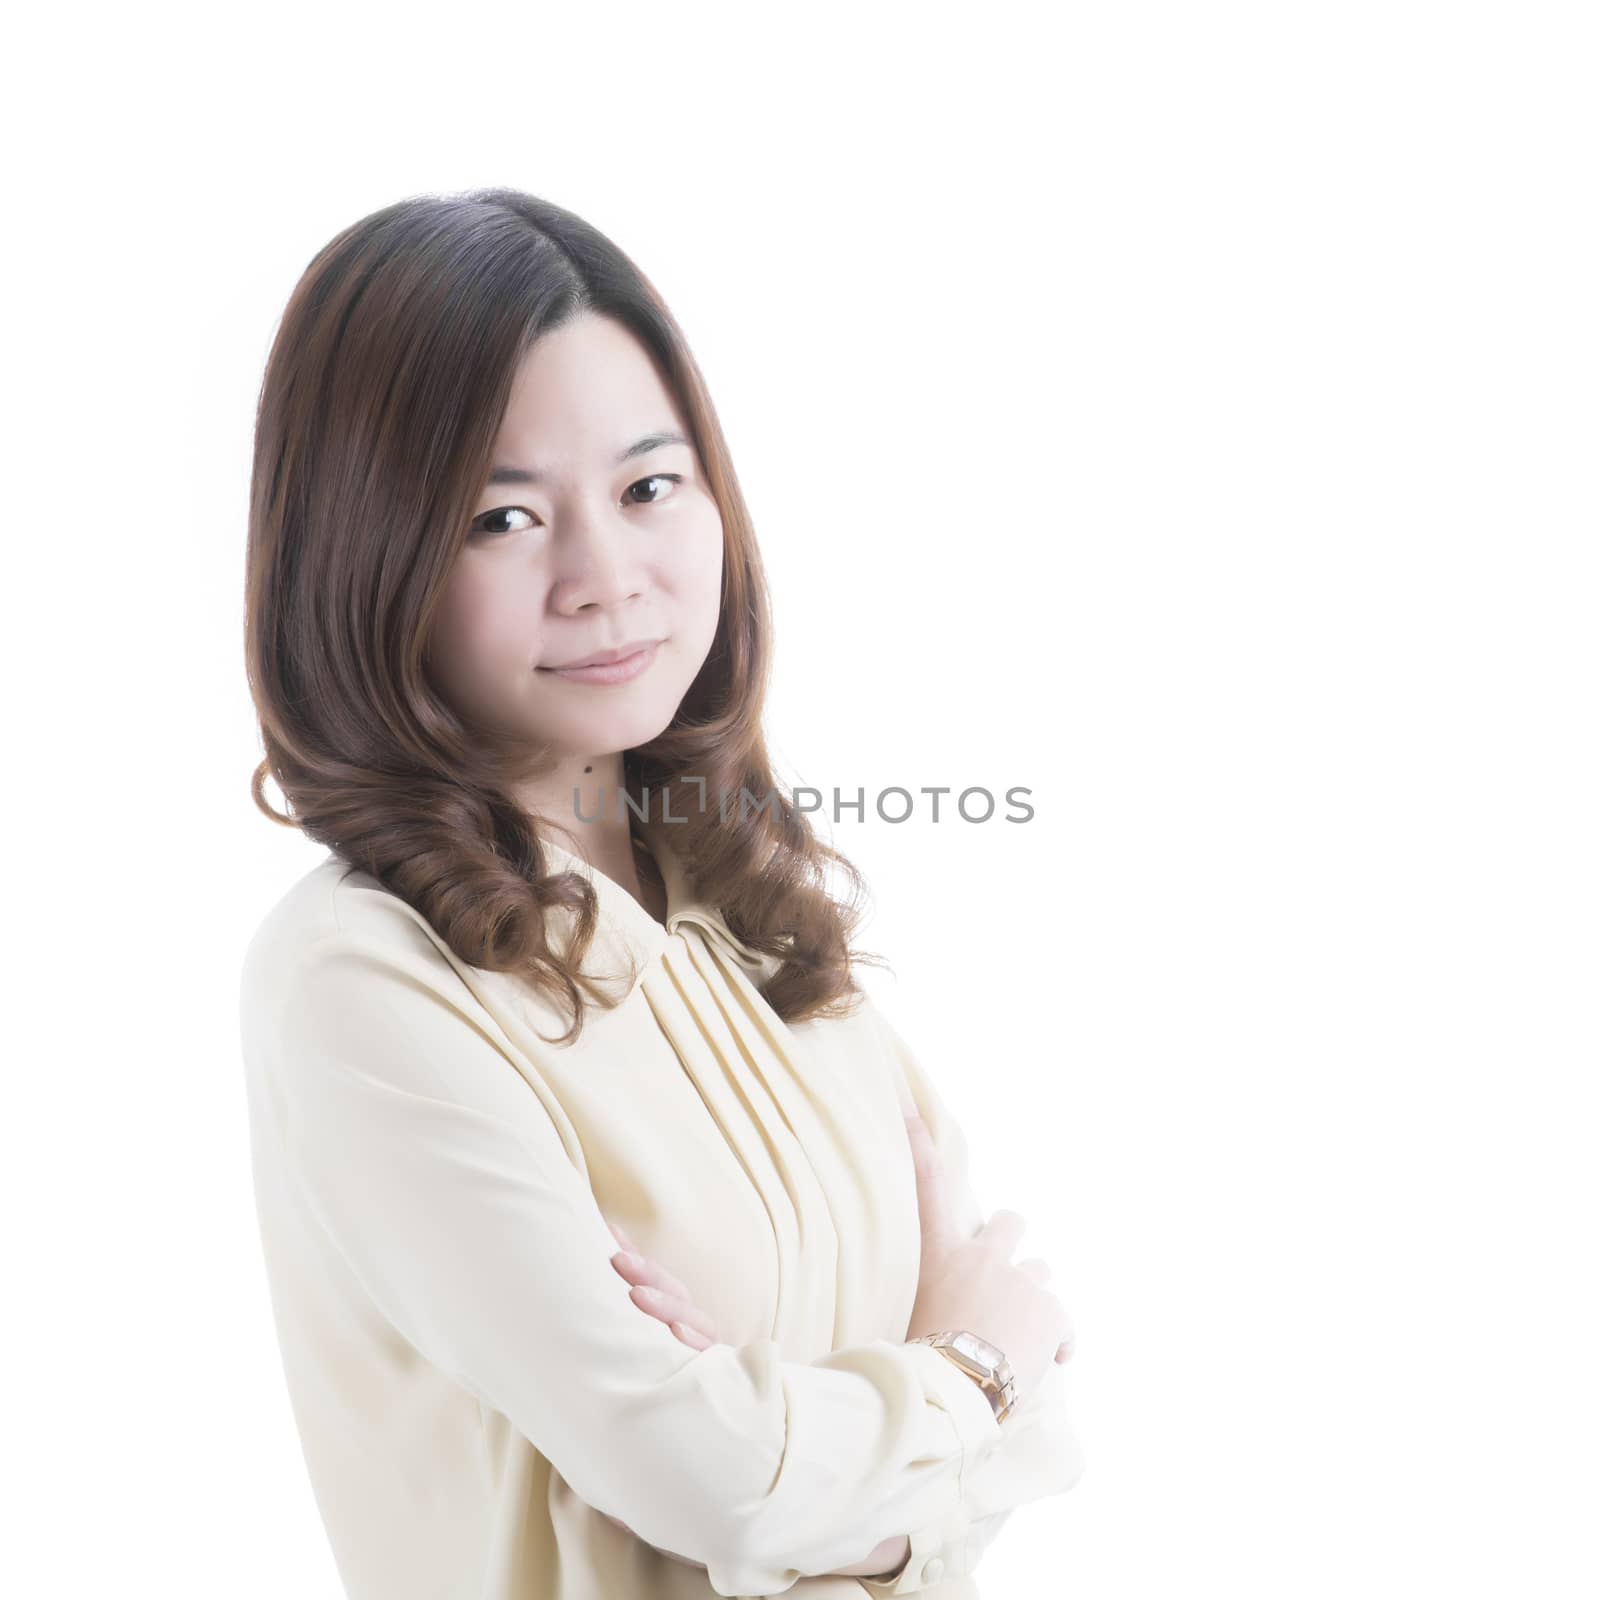 Asian woman in business office concept on white background